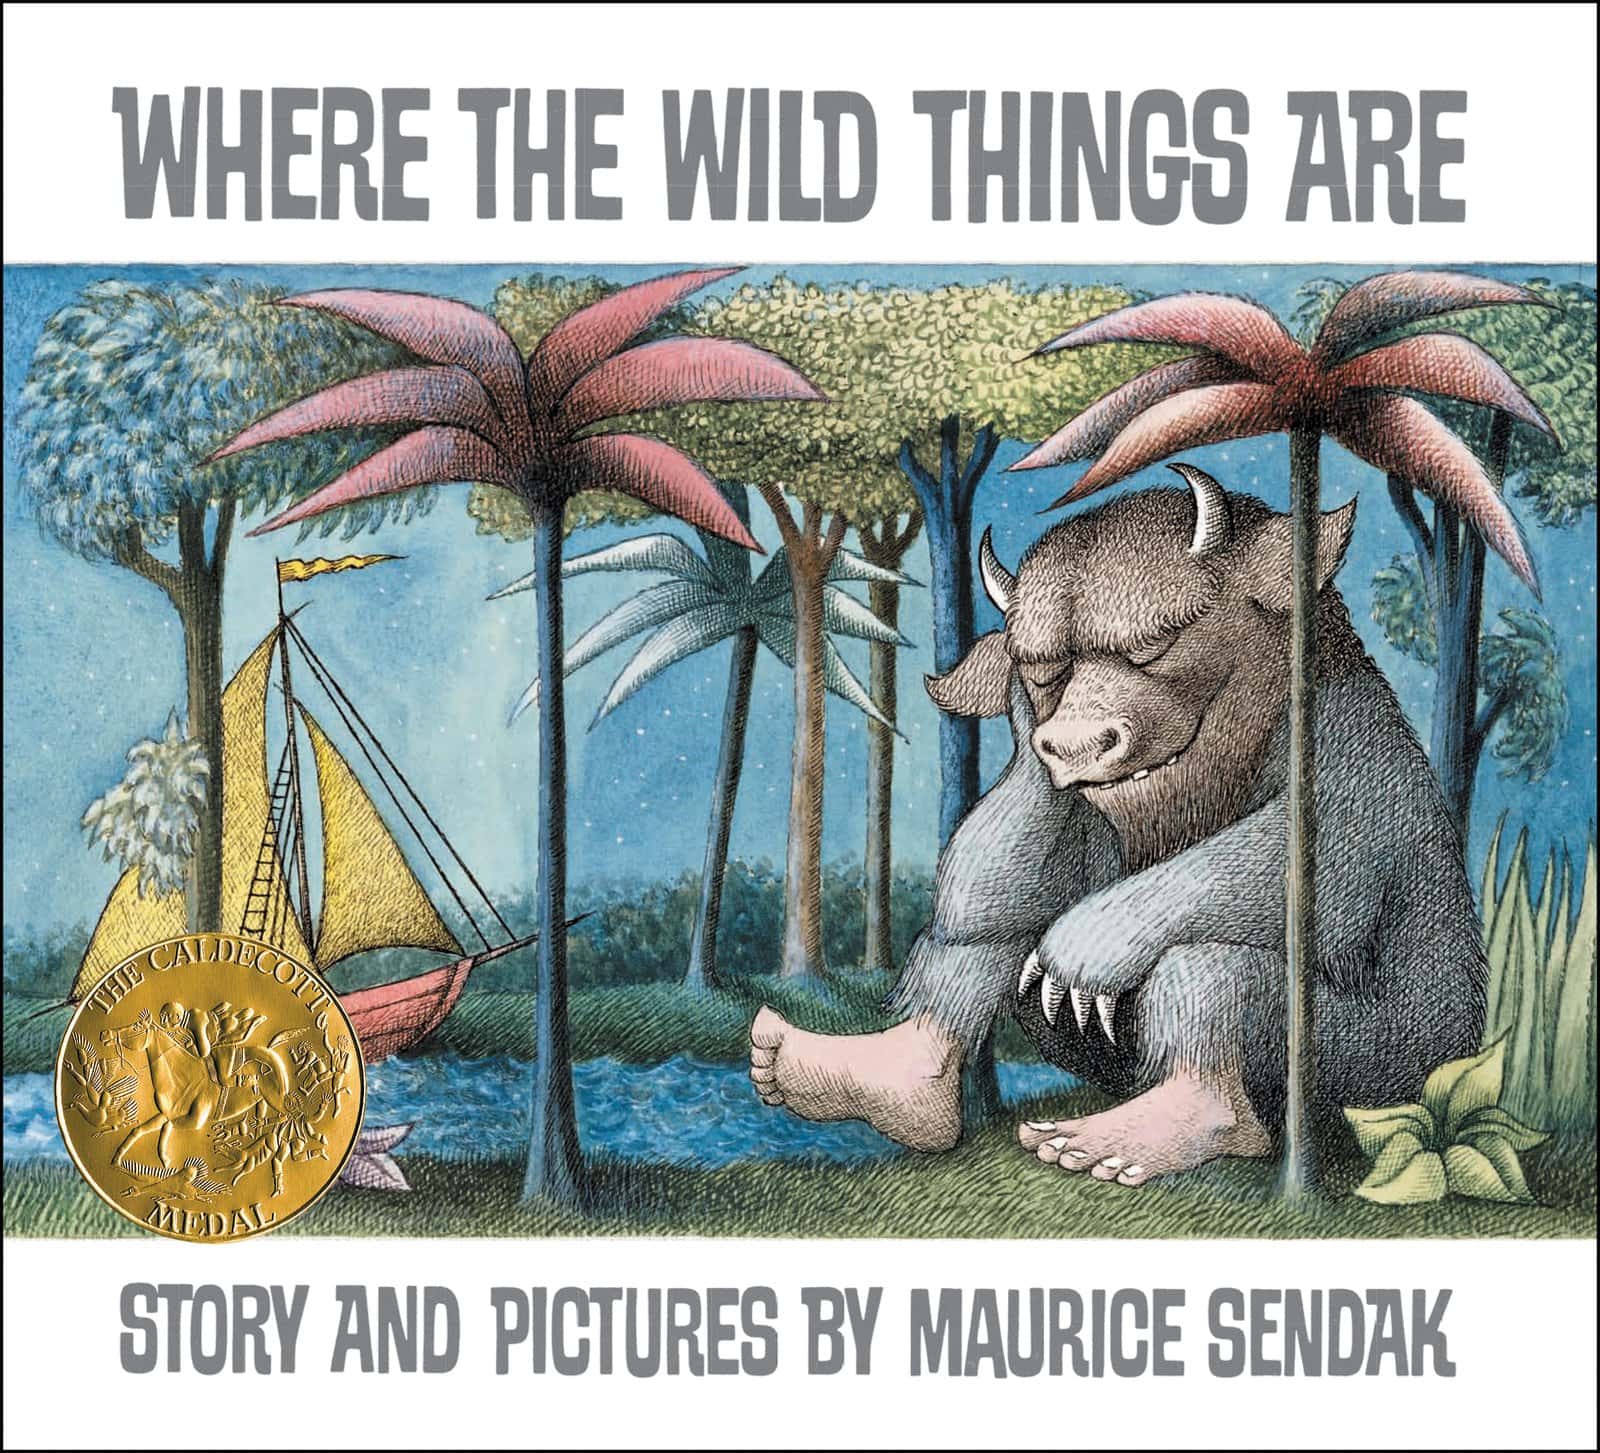 "Where the Wild Things Are" by Maurice Sendak